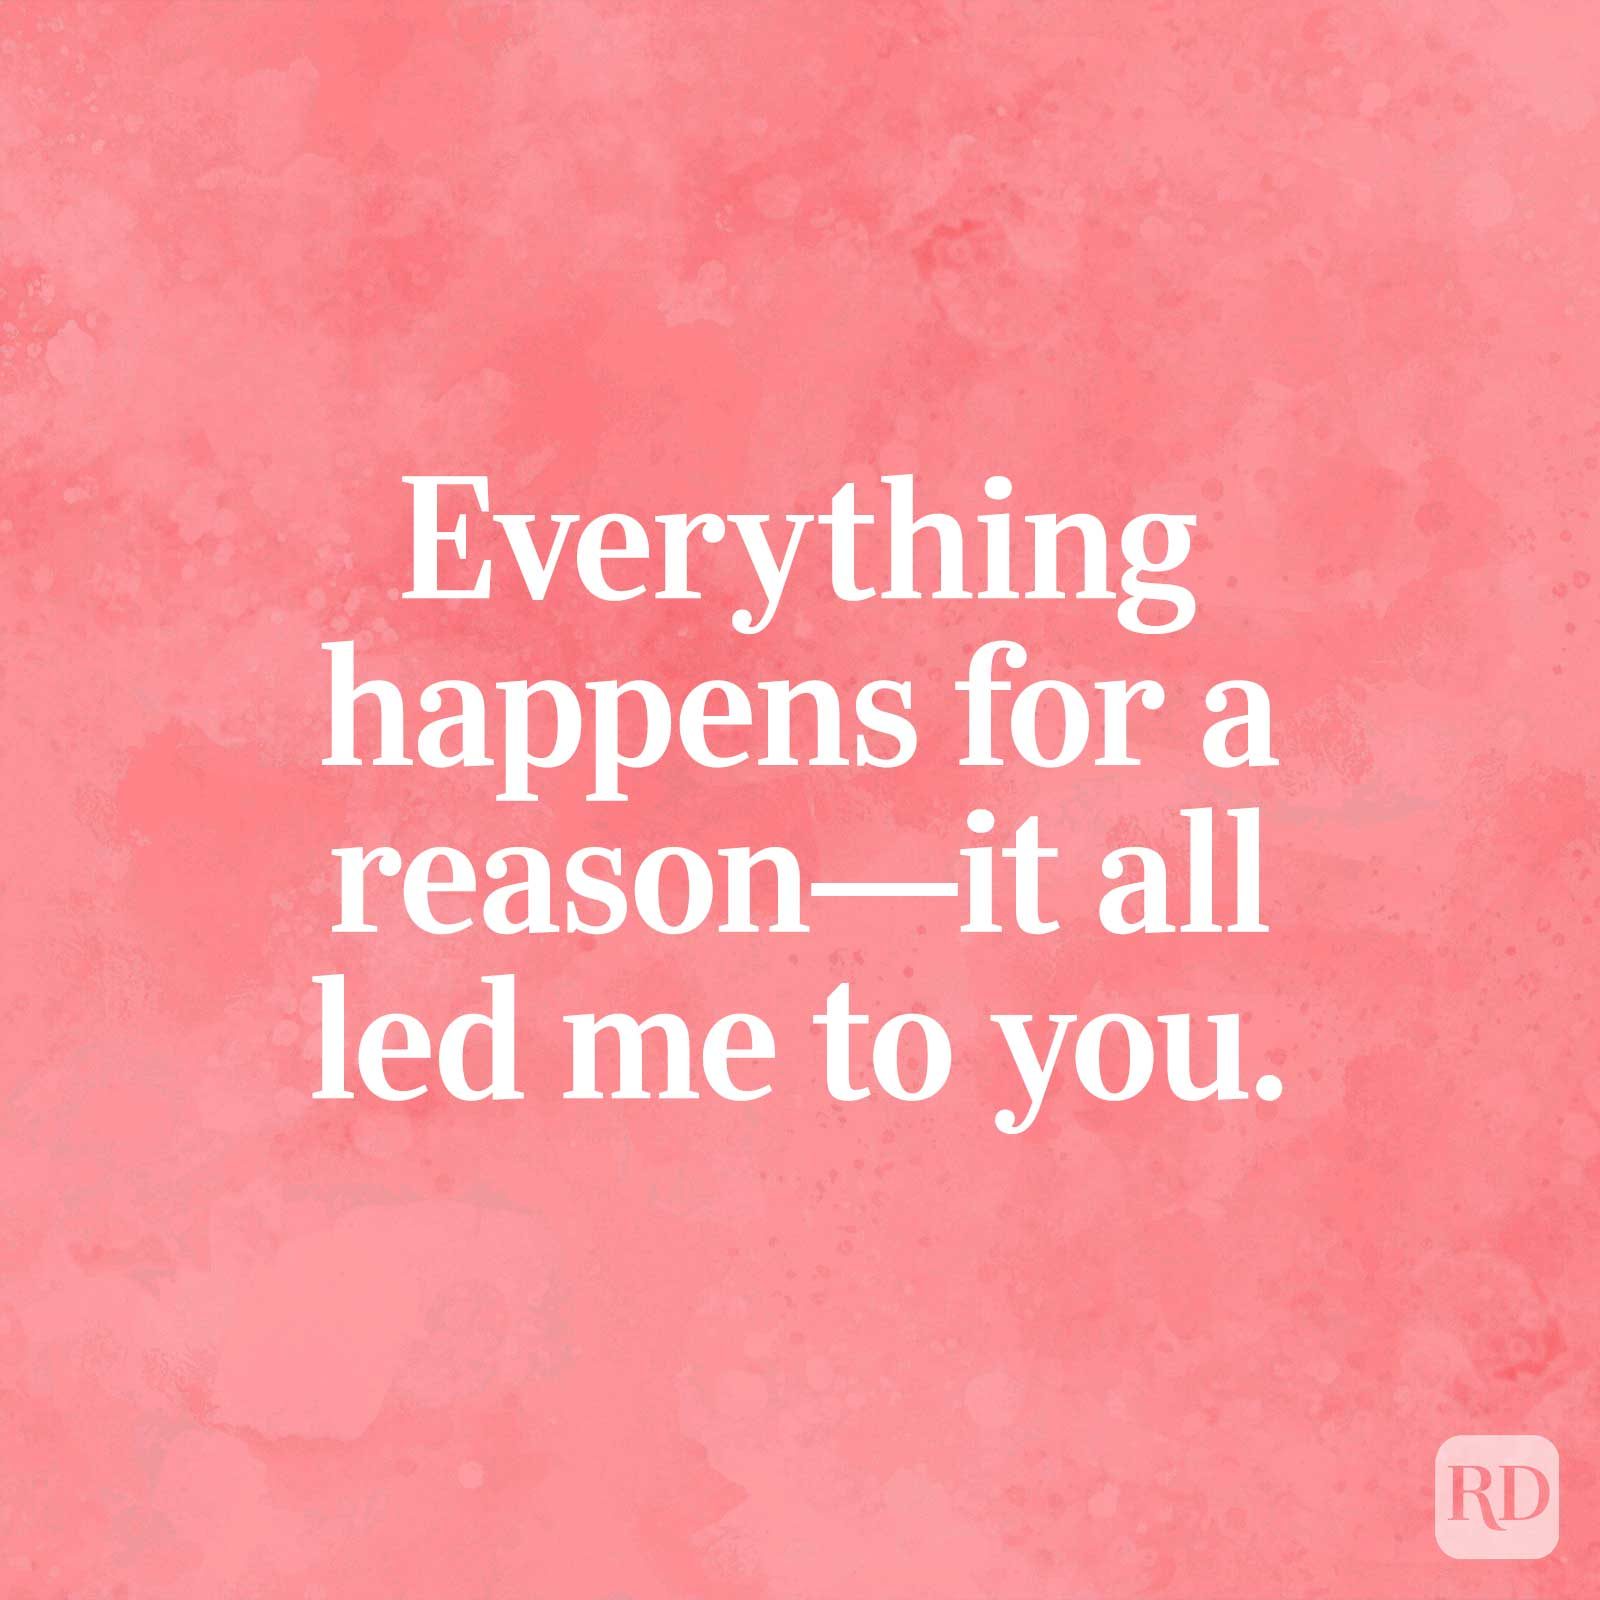 100+ happy anniversary quotes for husband to show him your love